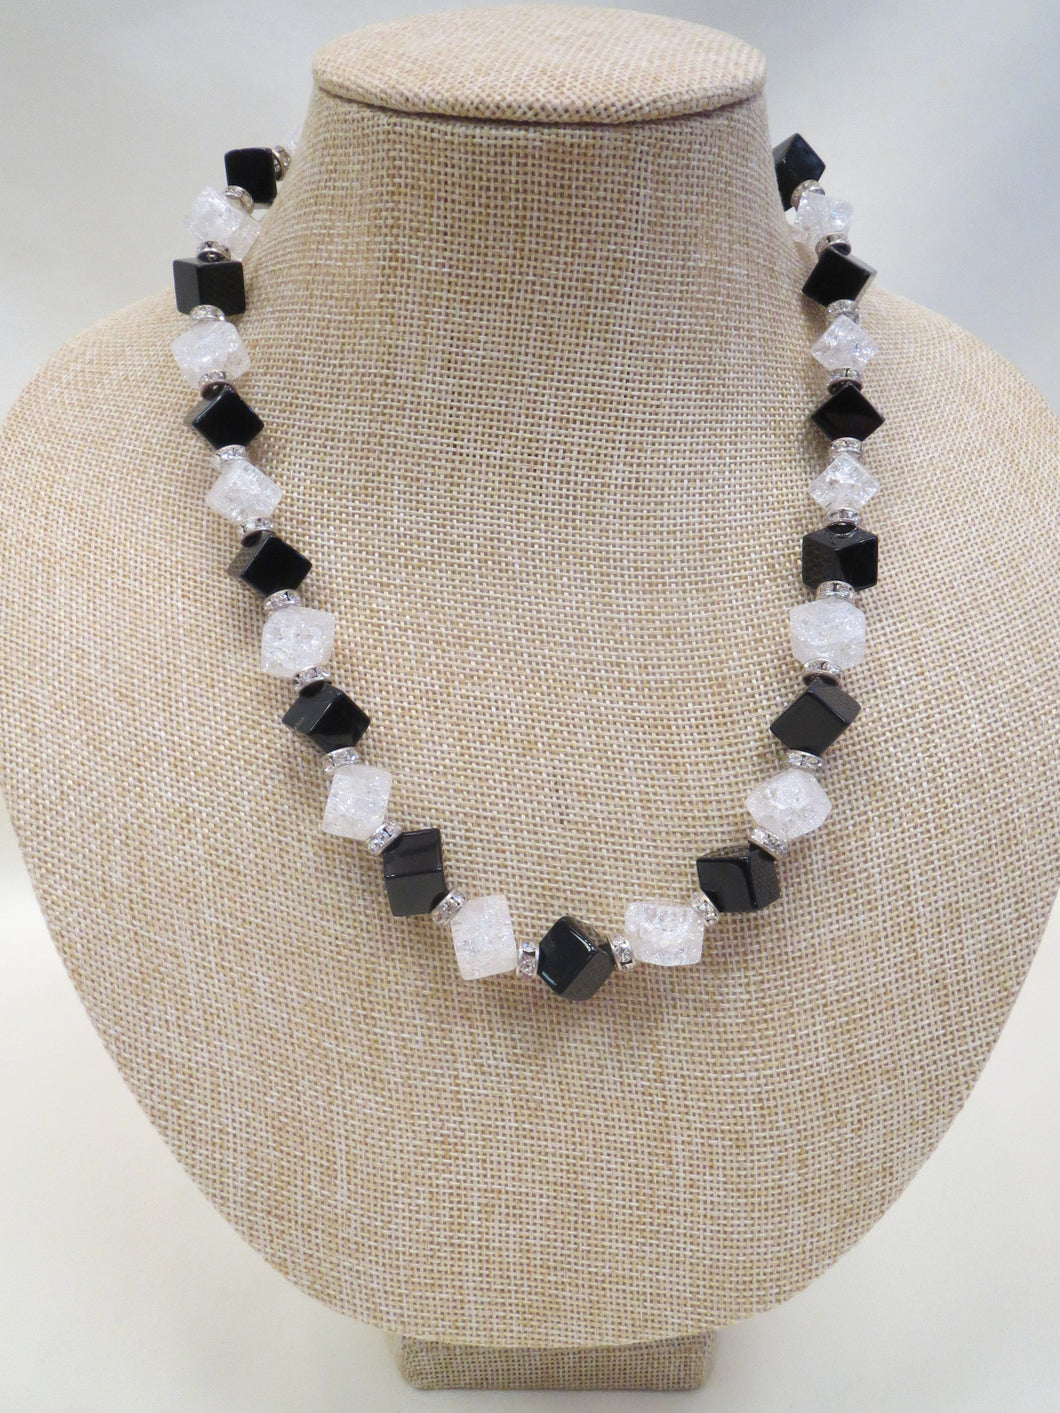 ADO Square Beads Black and White/Clear Necklace | All Dec'd Out